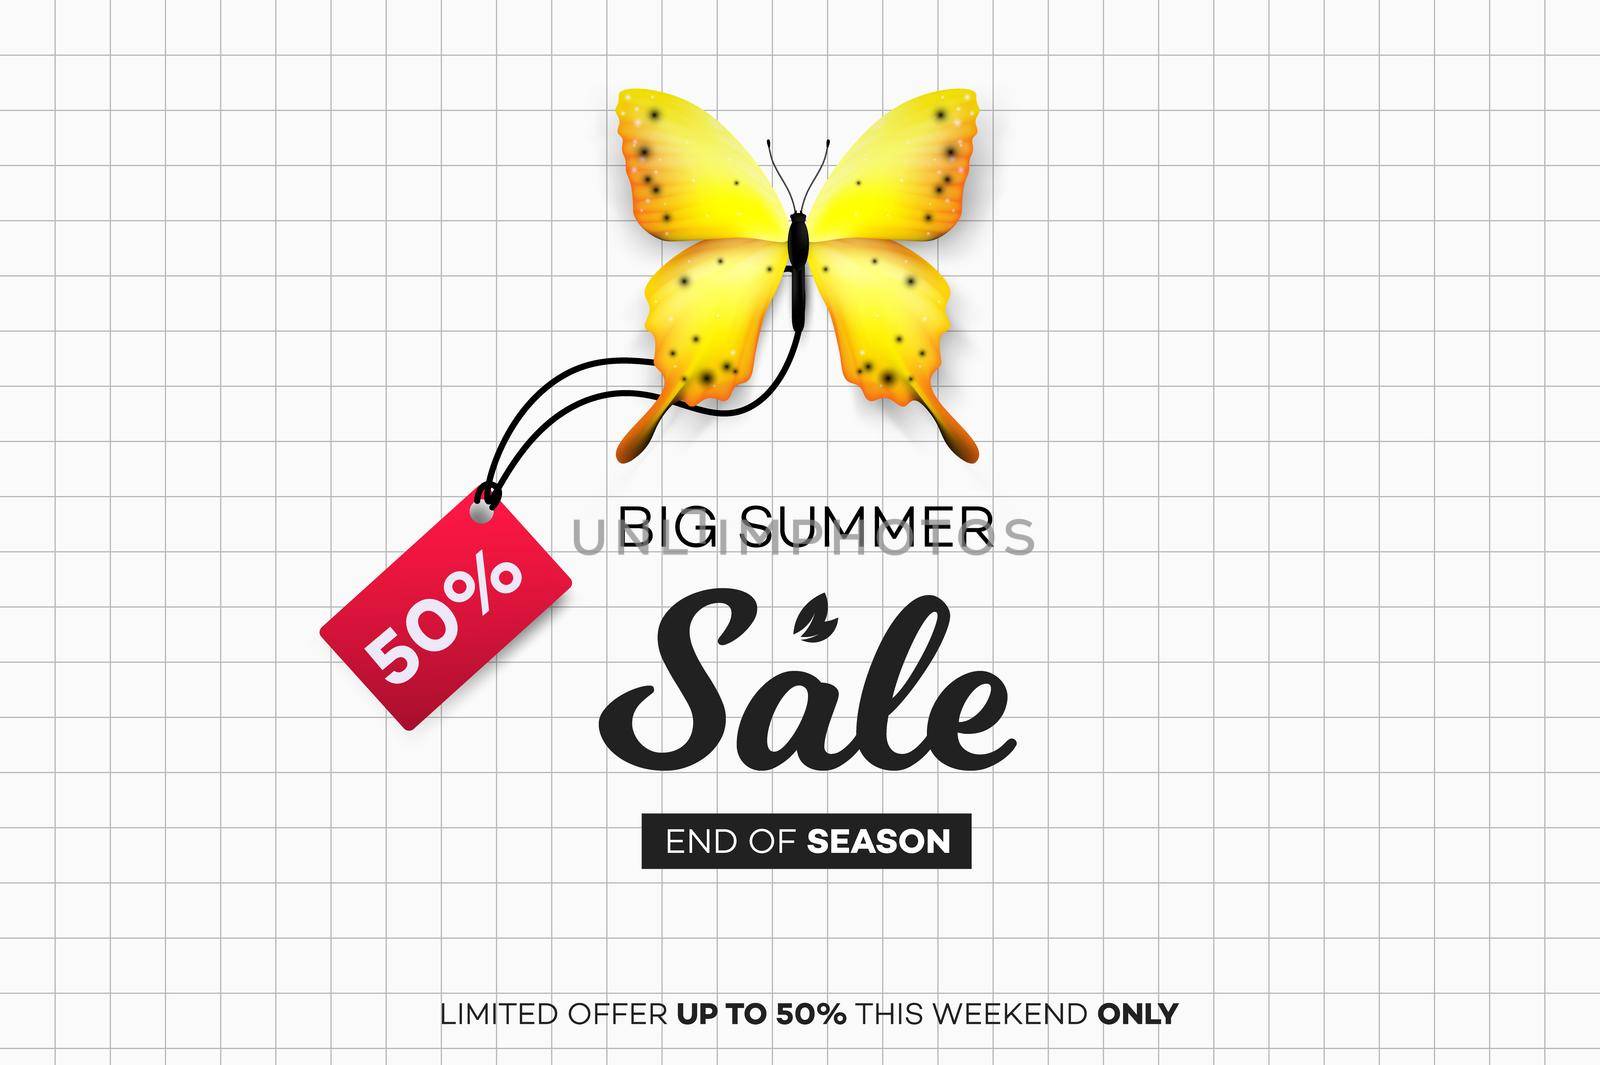 Final Summer Sale. Yellow Butterfly With Sale Tag Over Notebook Sheet. Modern Conceptual Vector Illustration.